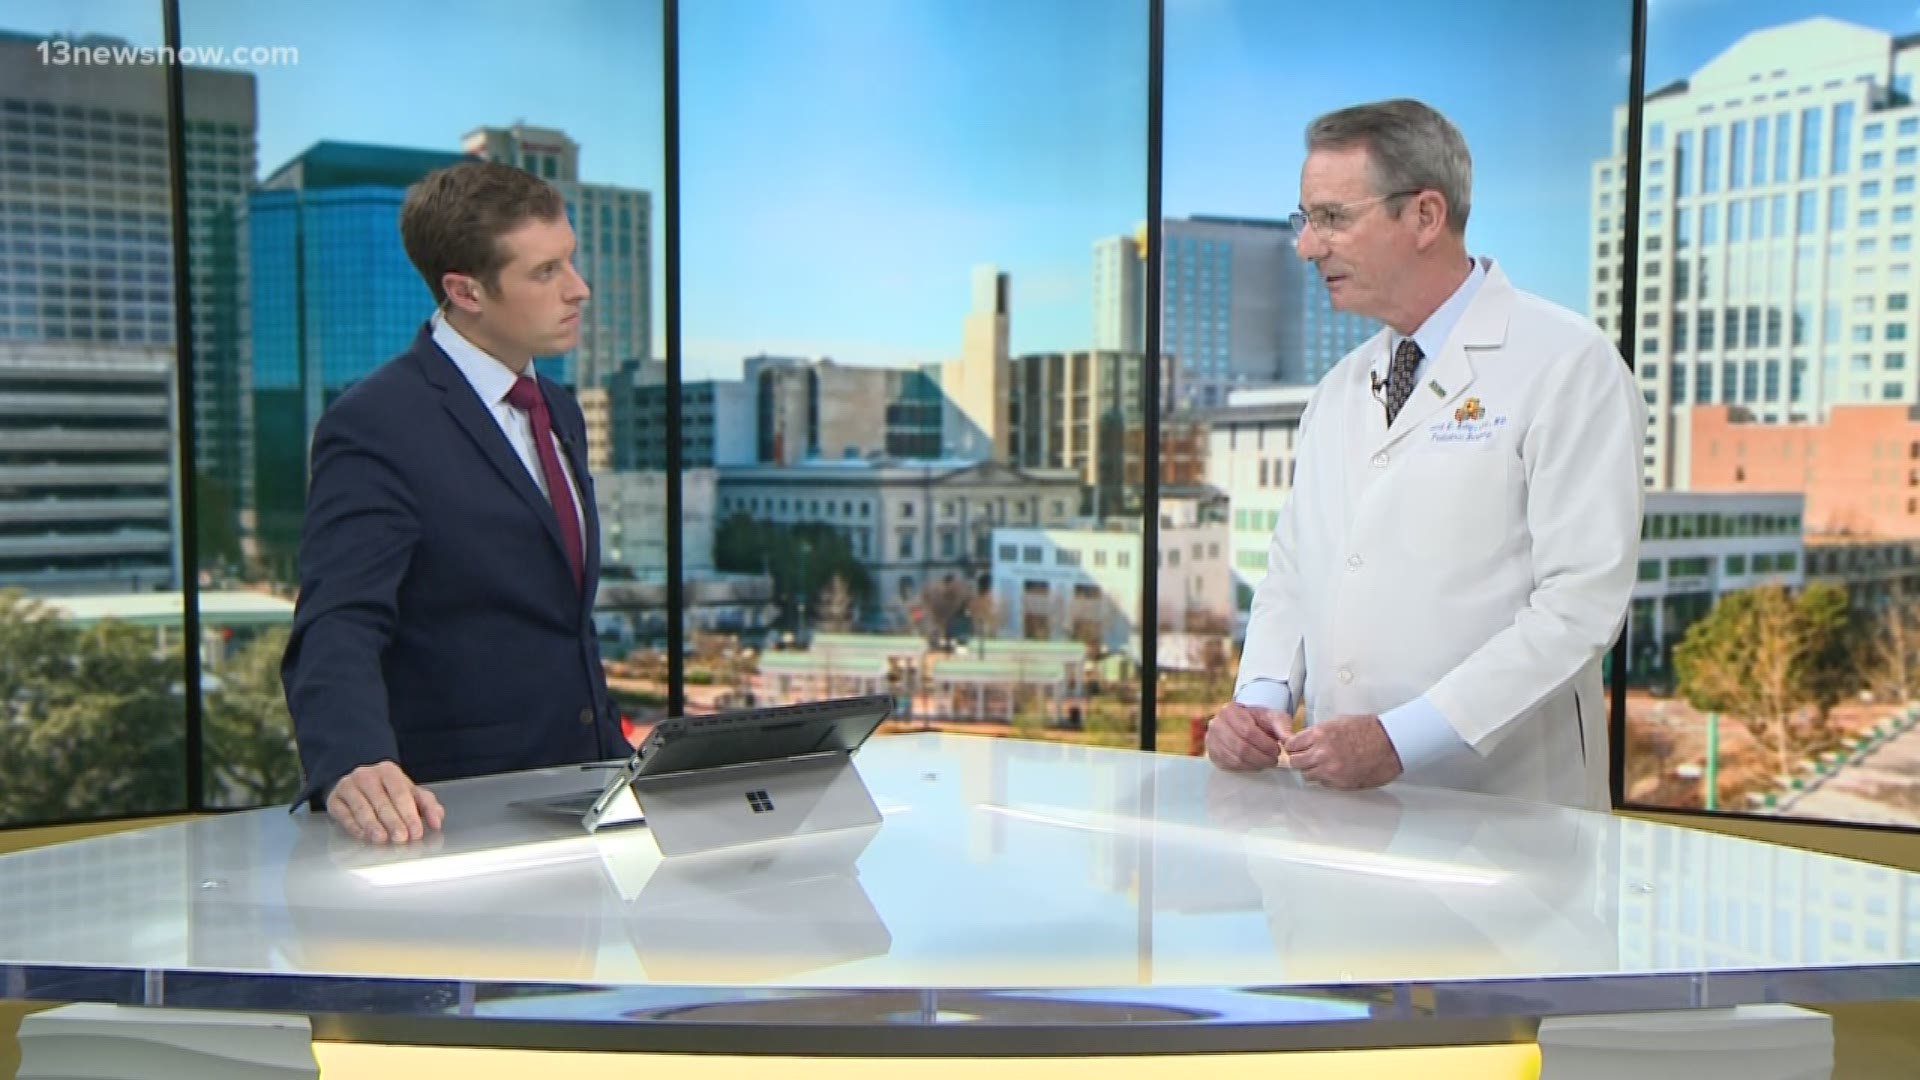 13News Now Dan Kennedy sits down with Dr. Robert Kelly, the Chief of Surgery at CHKD.